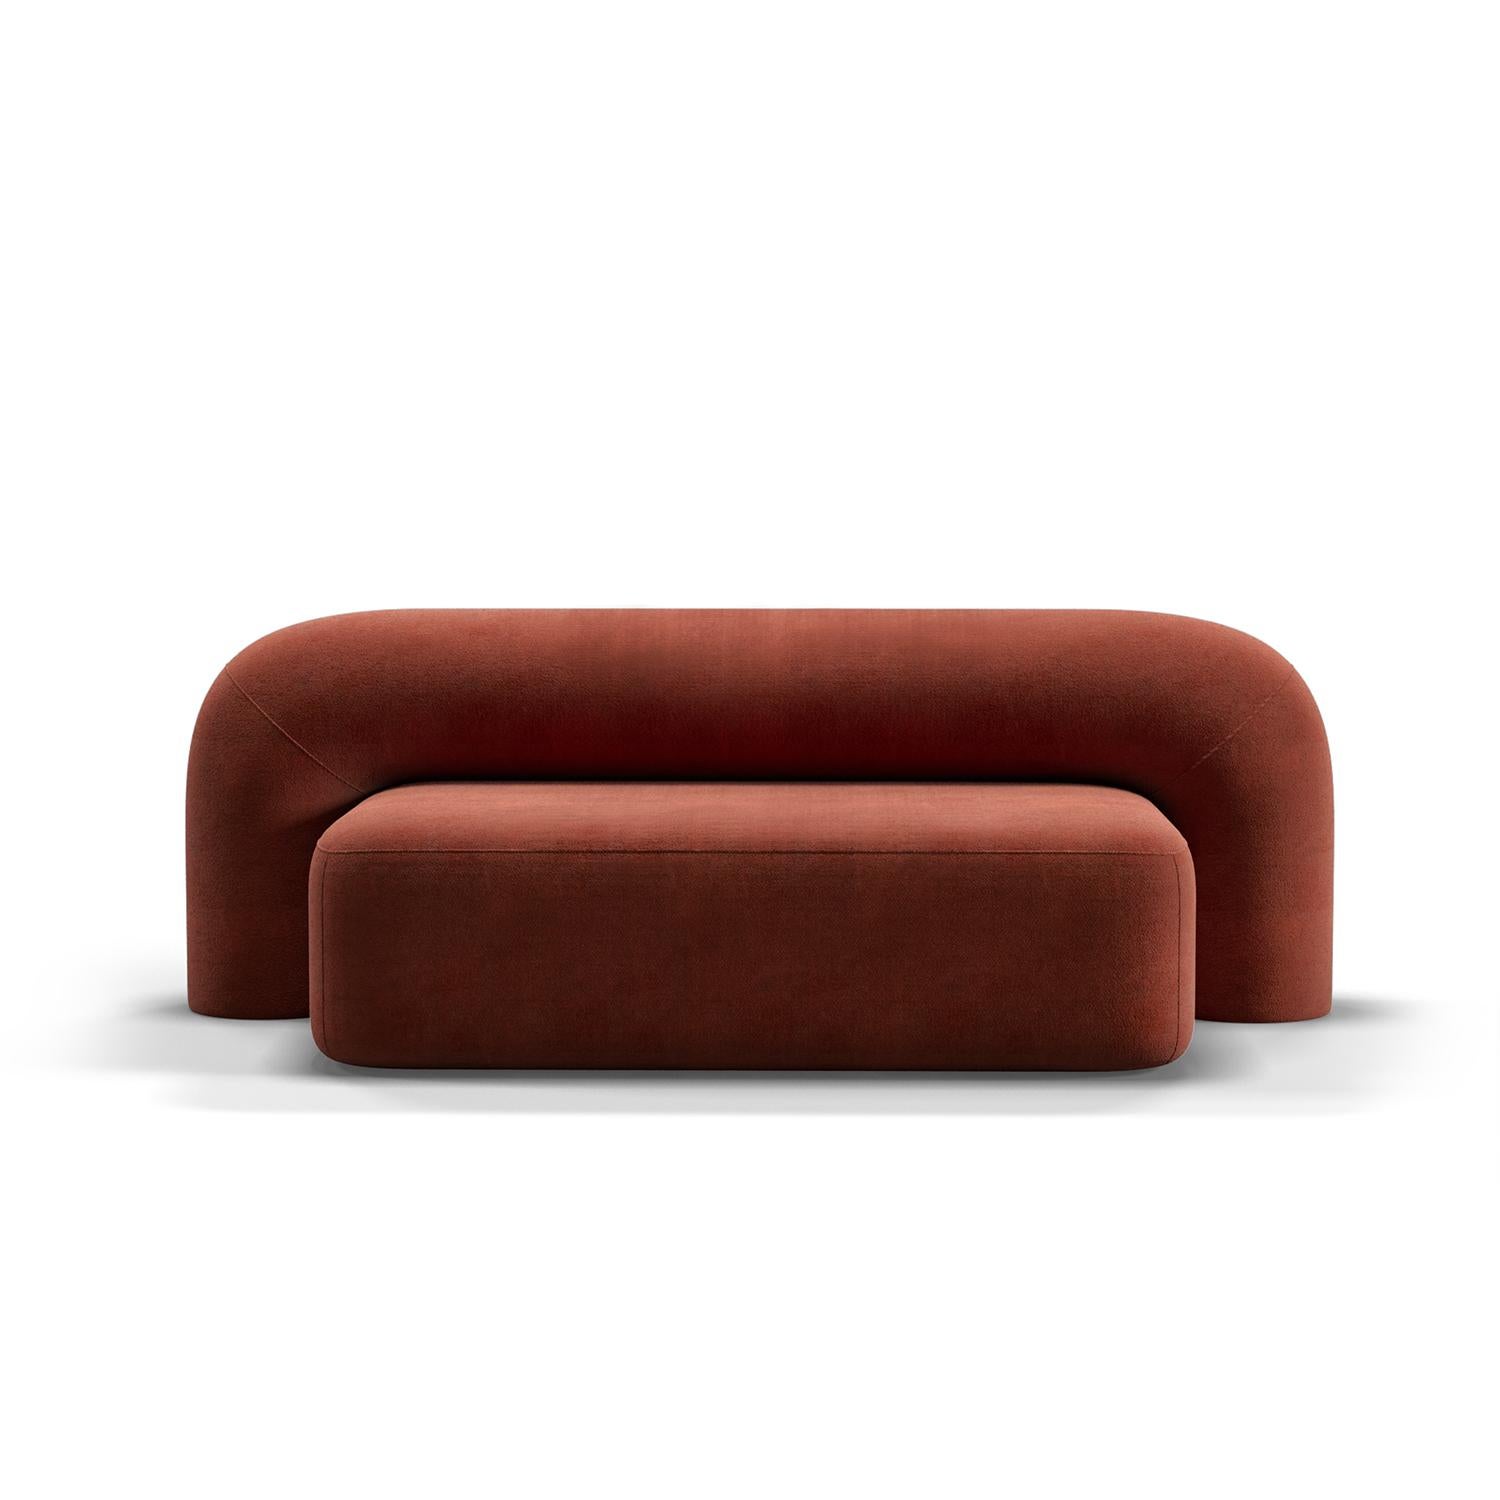 Moss 1800 sofa by Artu
Pavel Vetrov
Dimensions: W 180 x D 82 x H 76 cm
Materials: Wood, Upholstery
Other colors and materials available.

Soft, flowing, tactile forms of the new Moss collection are inspired by moss that embraces the surface of